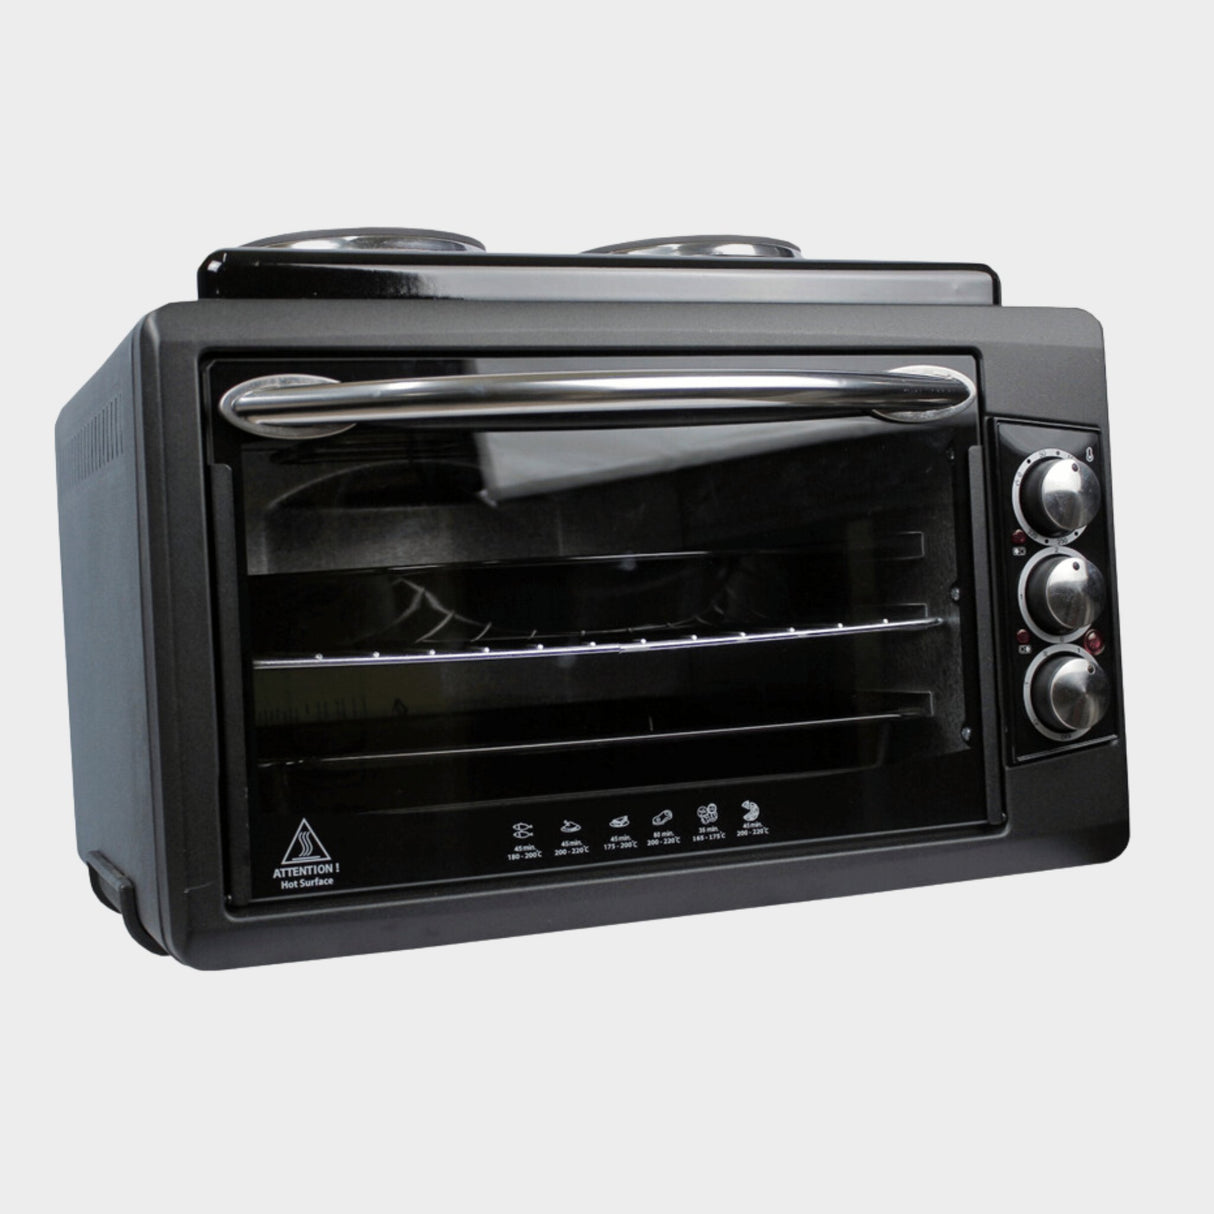 Blueflame 50L Mini Oven with 2 hot plates BF-0725 - Black - KWT Tech Mart